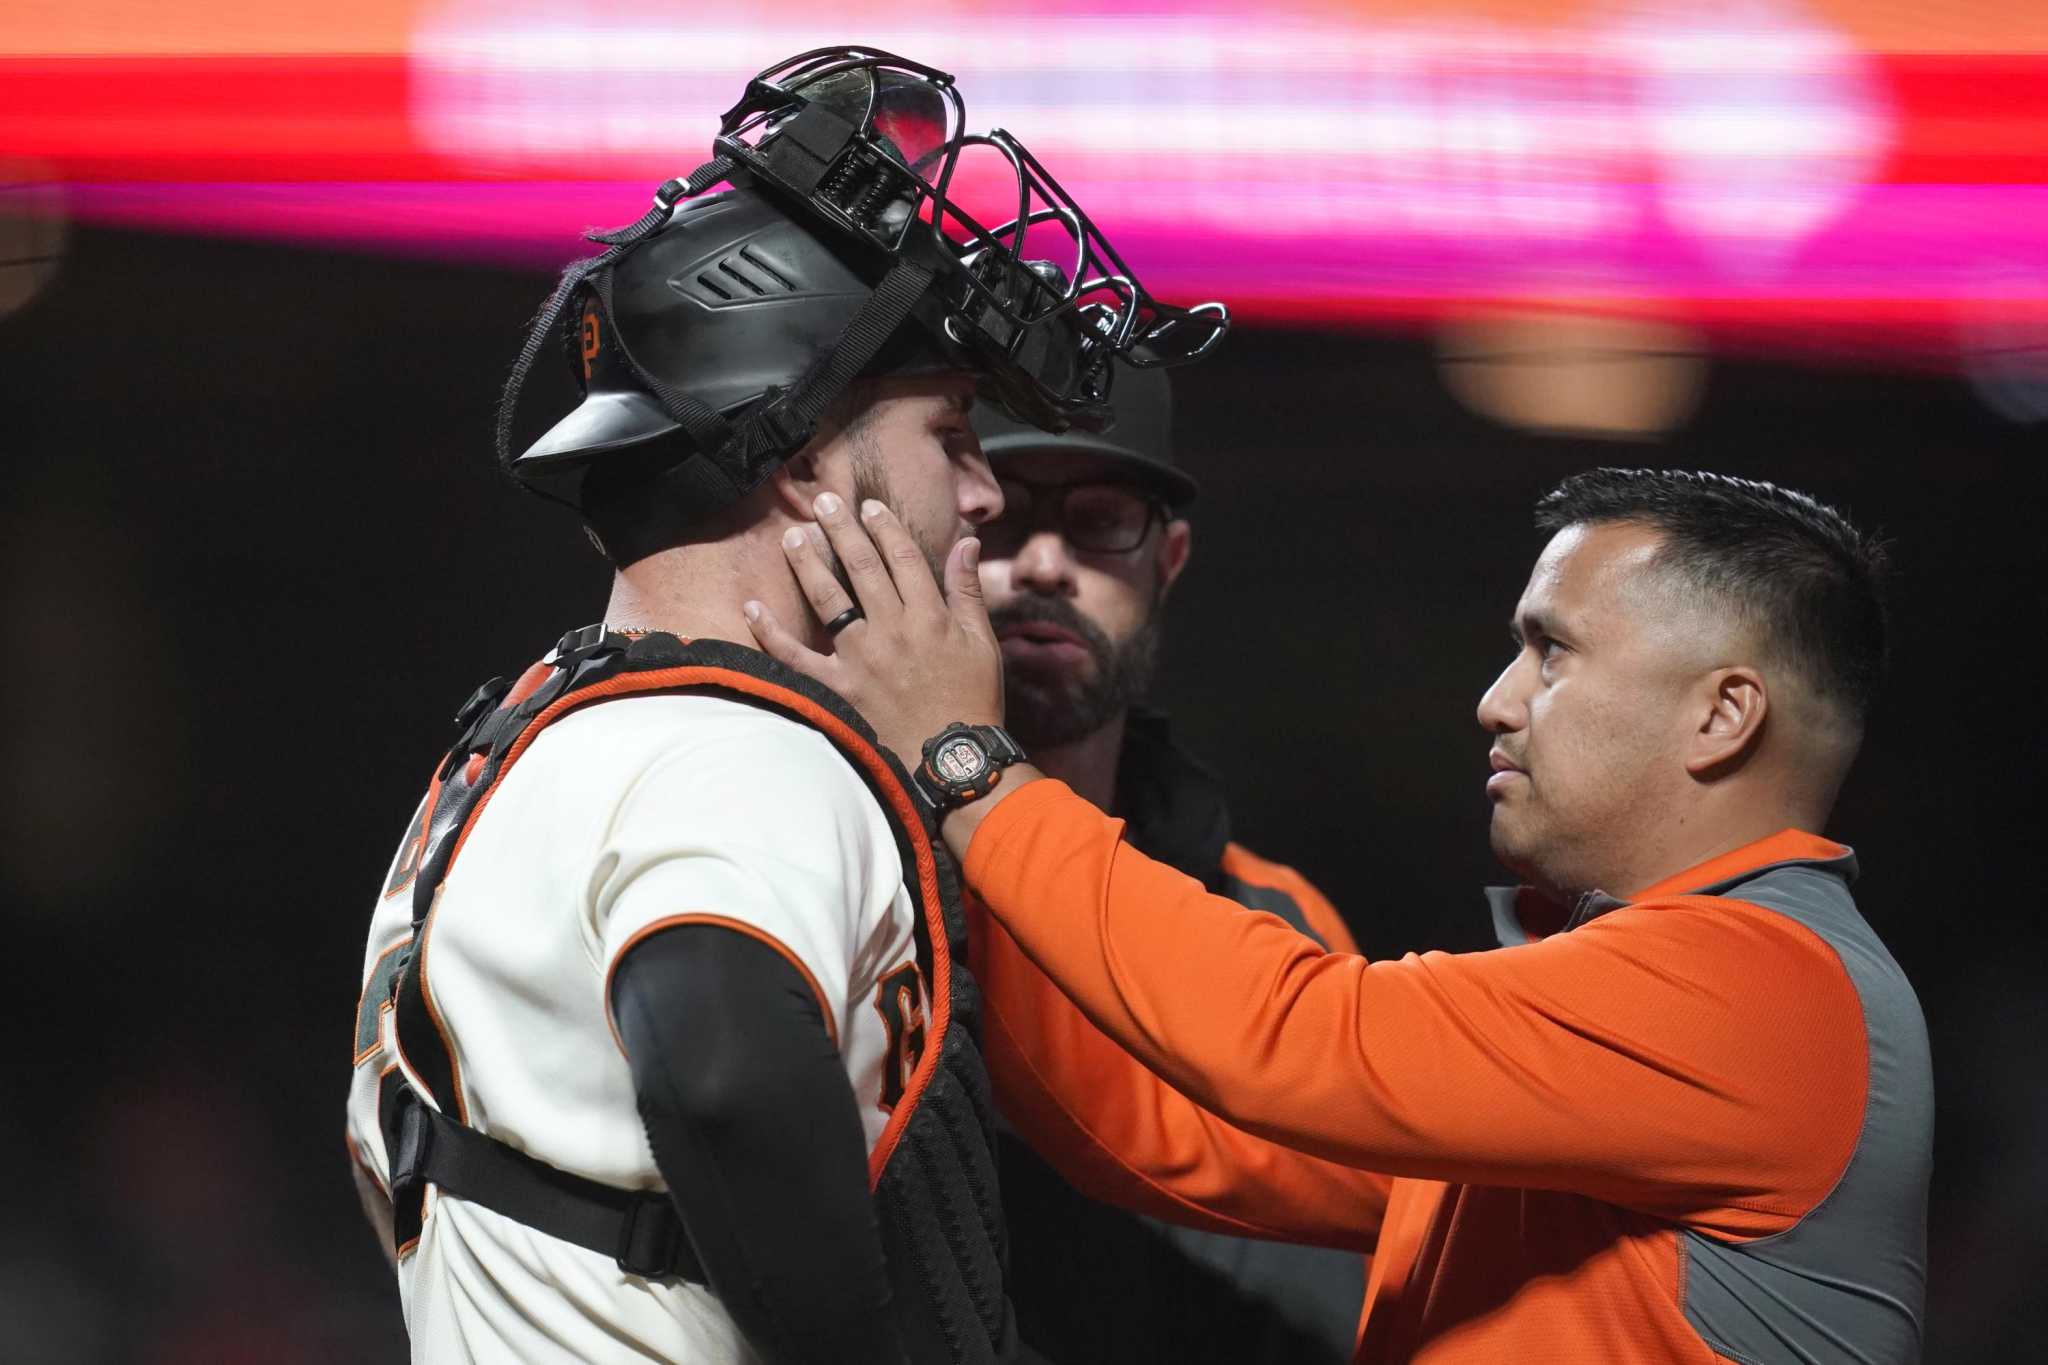 Joey Bart gets nod in 2nd Giants lineup – 810 The Spread